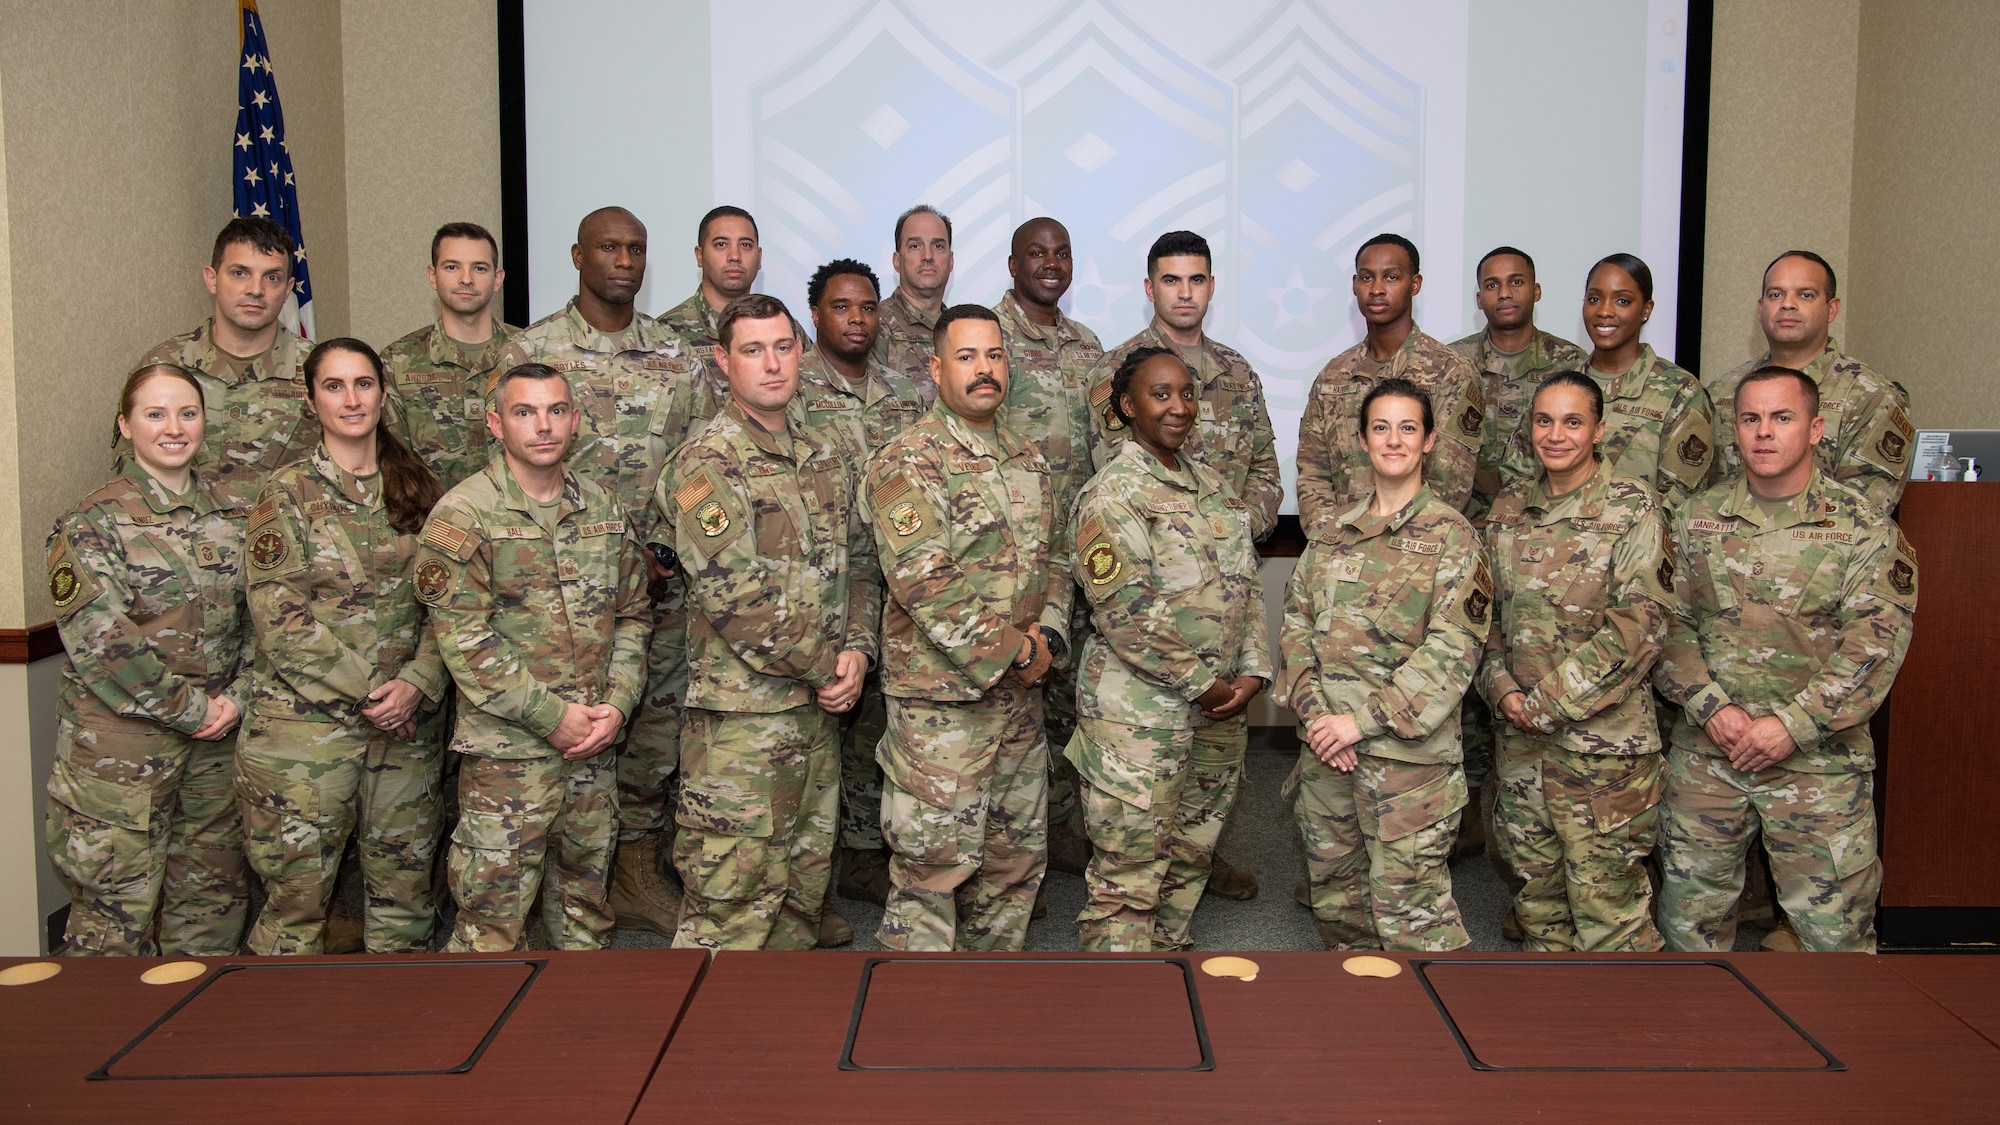 Reserve Citizen Airmen from the 514th Air Mobility Wing First Sergeants Council pose for a photo at the second annual First Sergeant Symposium at Joint Base McGuire-Dix-Lakehurst, New Jersey, from November 5-6, 2021.